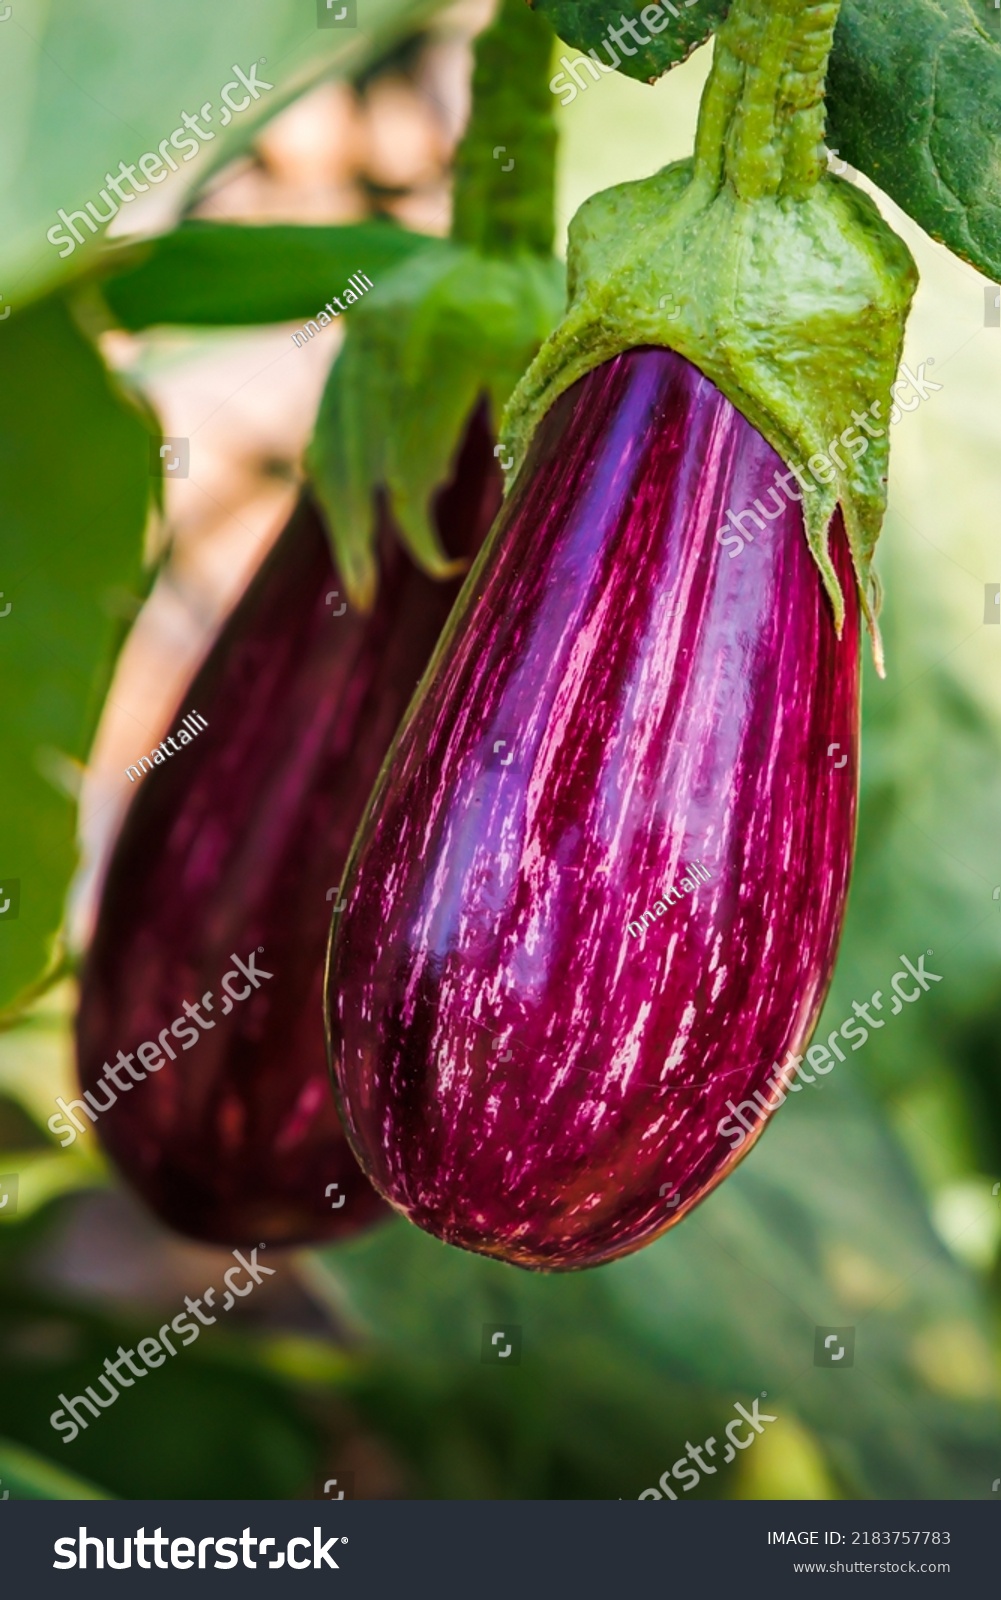 Striped eggplant fruits. Aubergine eggplant plant growing in Community garden. Aubergine vegetables harvest. Gardening background with eggplant deep purple color striped with white lines #2183757783